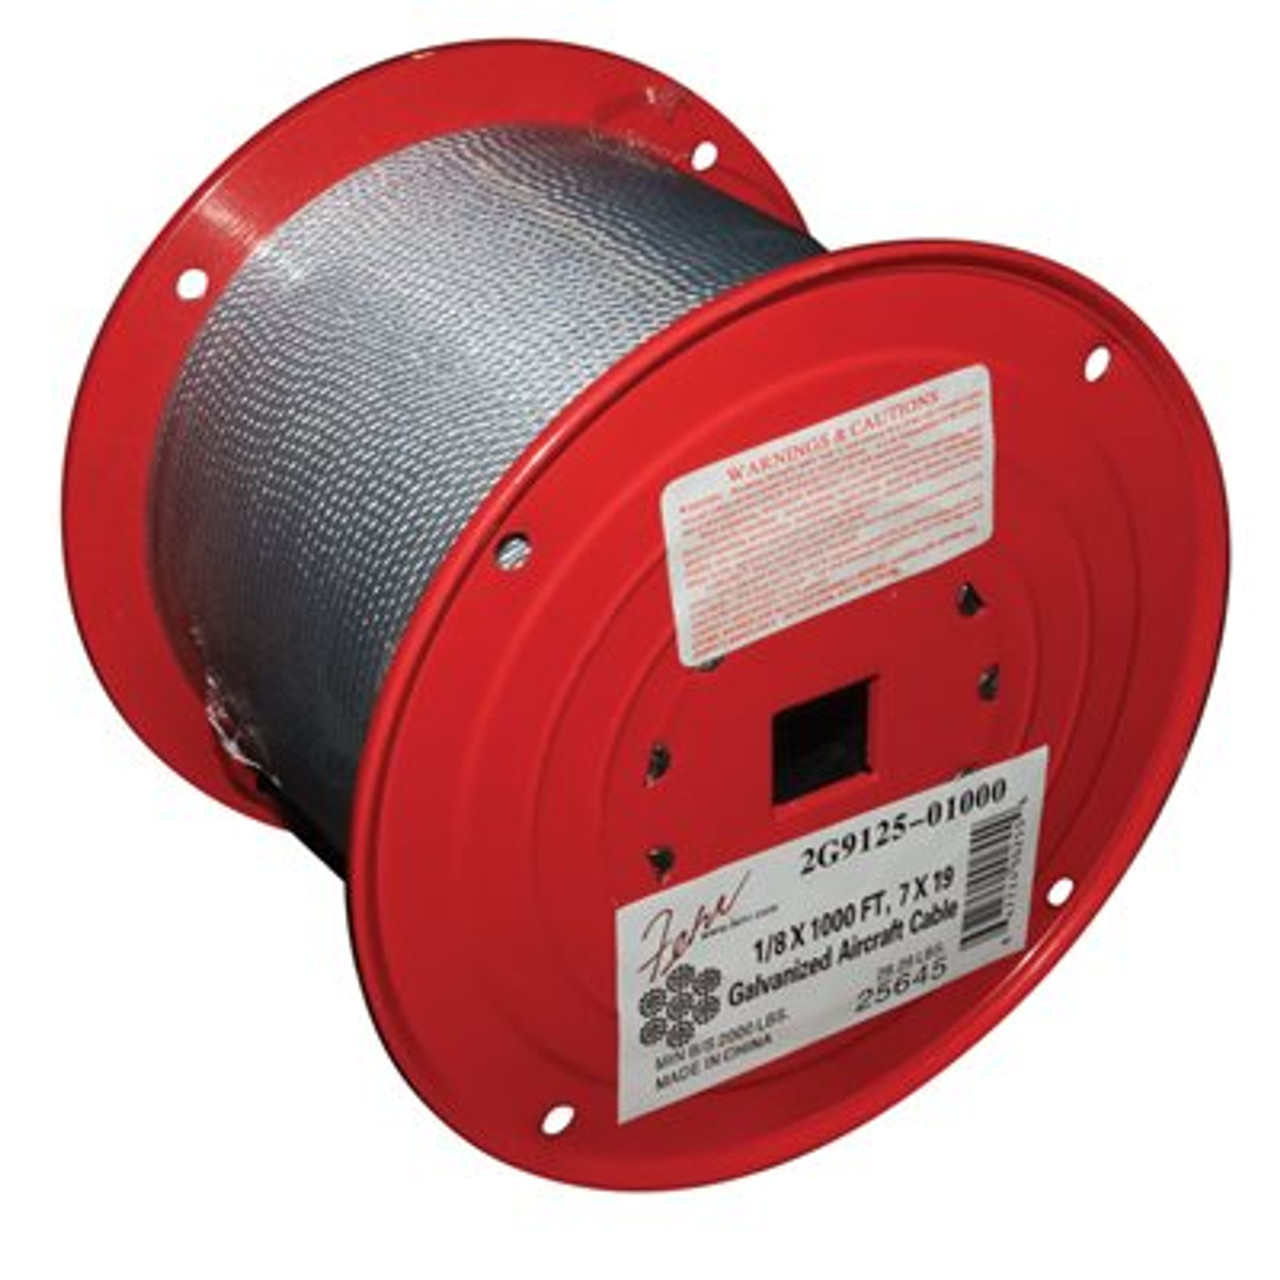 1/8 7x7 Galvanized aircraft cable (1000' roll)